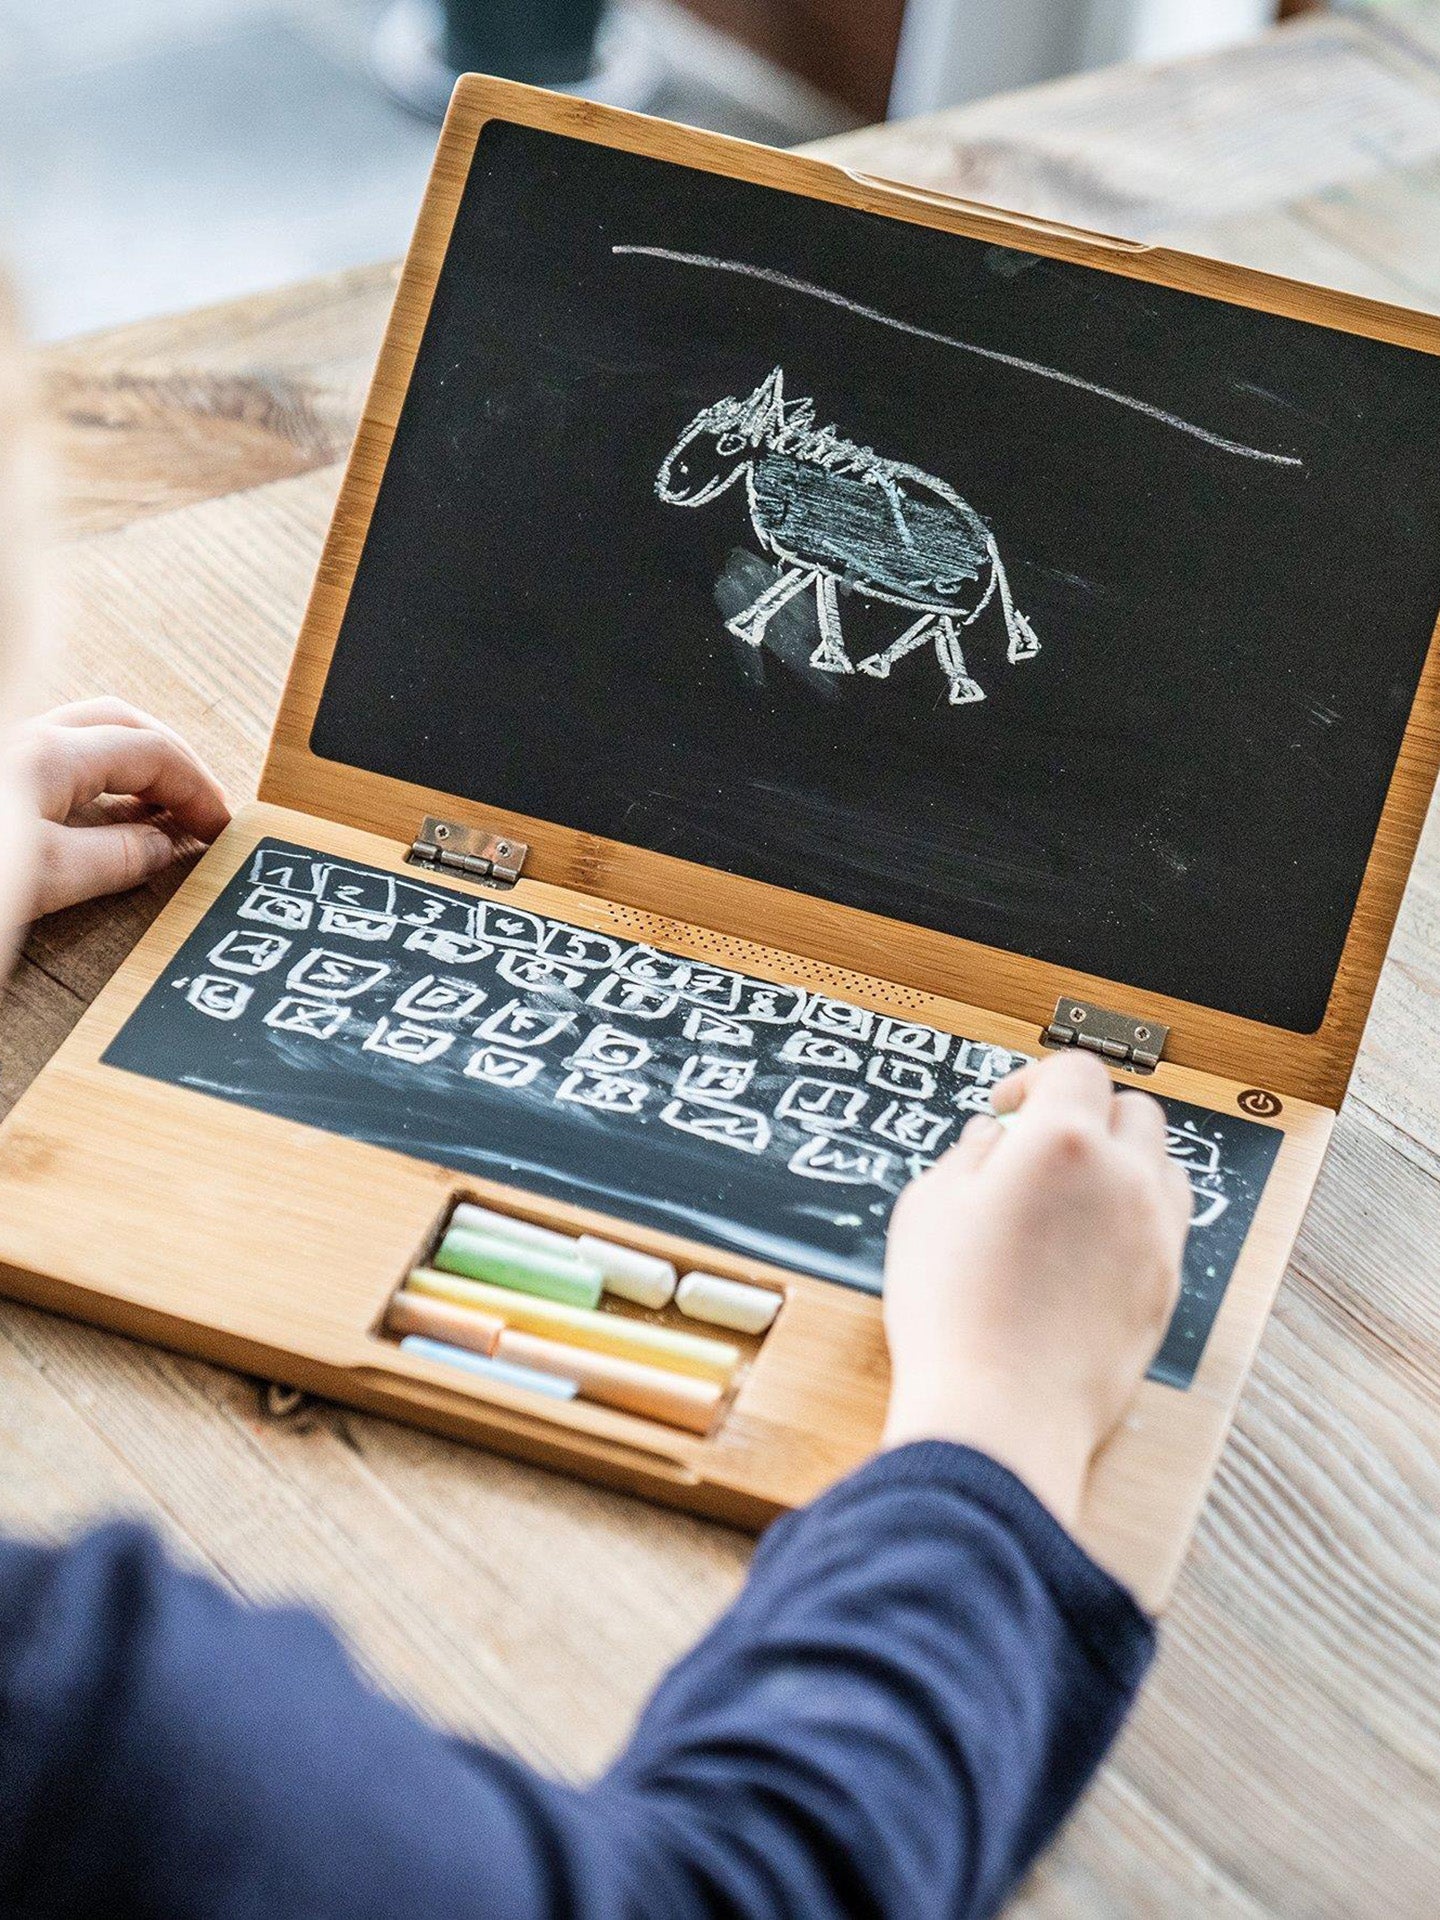 I-Wood laptop with blackboard and white chalk